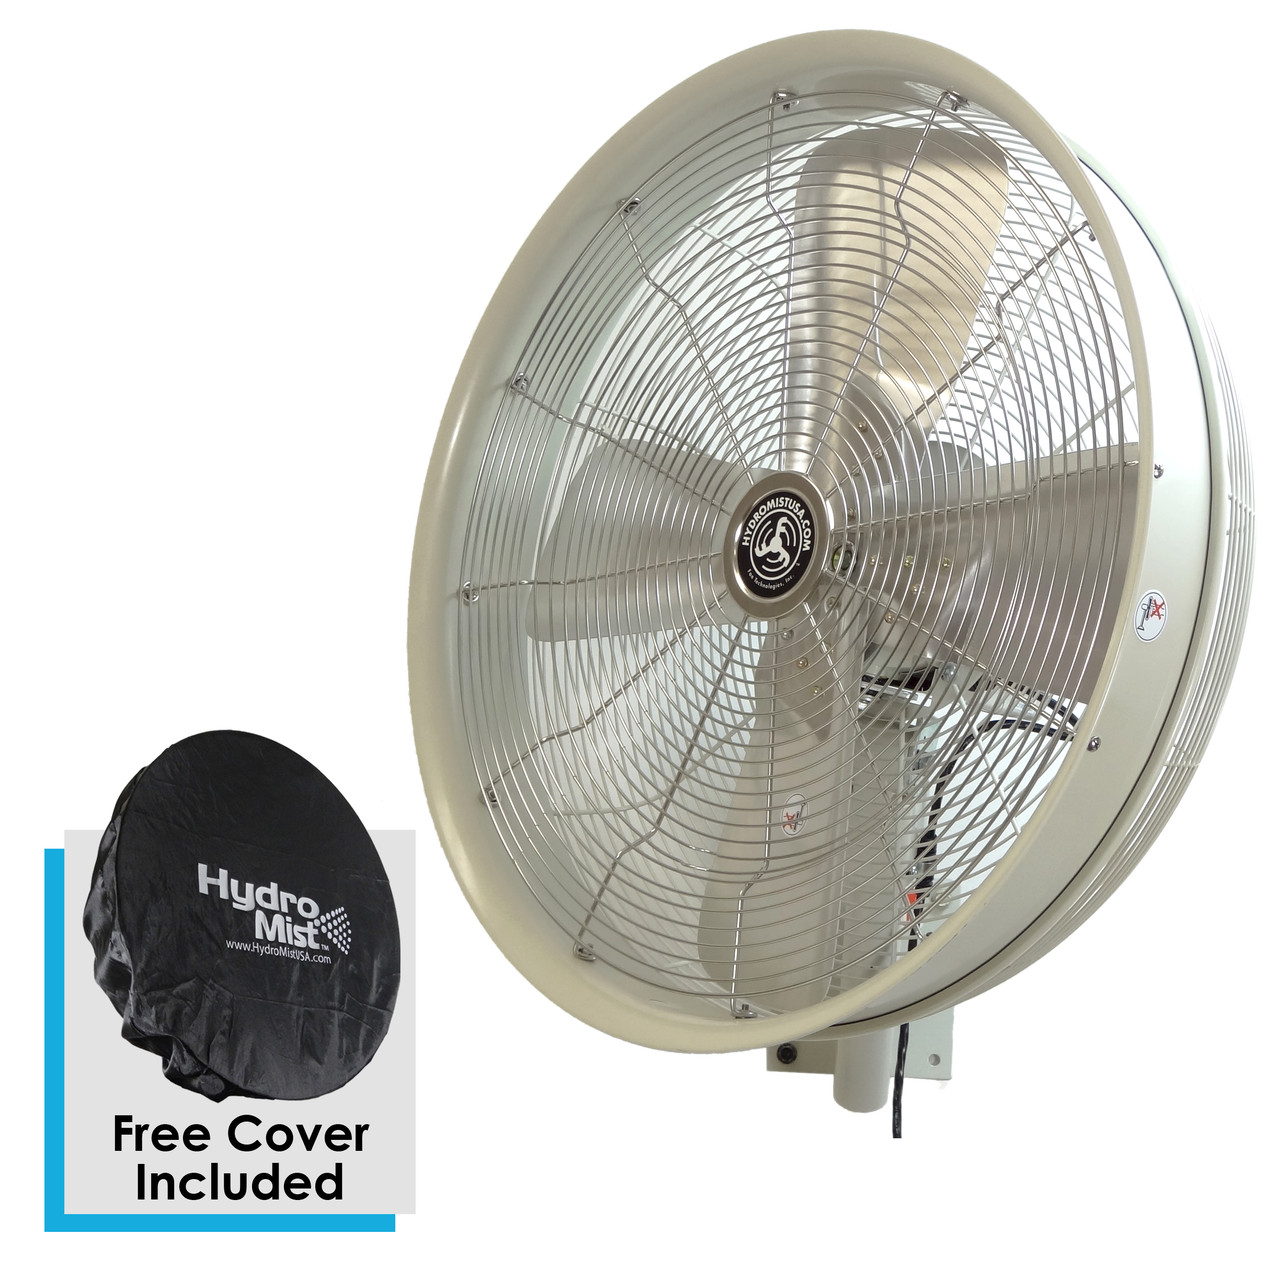 24 Inch Shrouded Outdoor Wall Mount Oscillating Fan 3-Speed Control on Motor